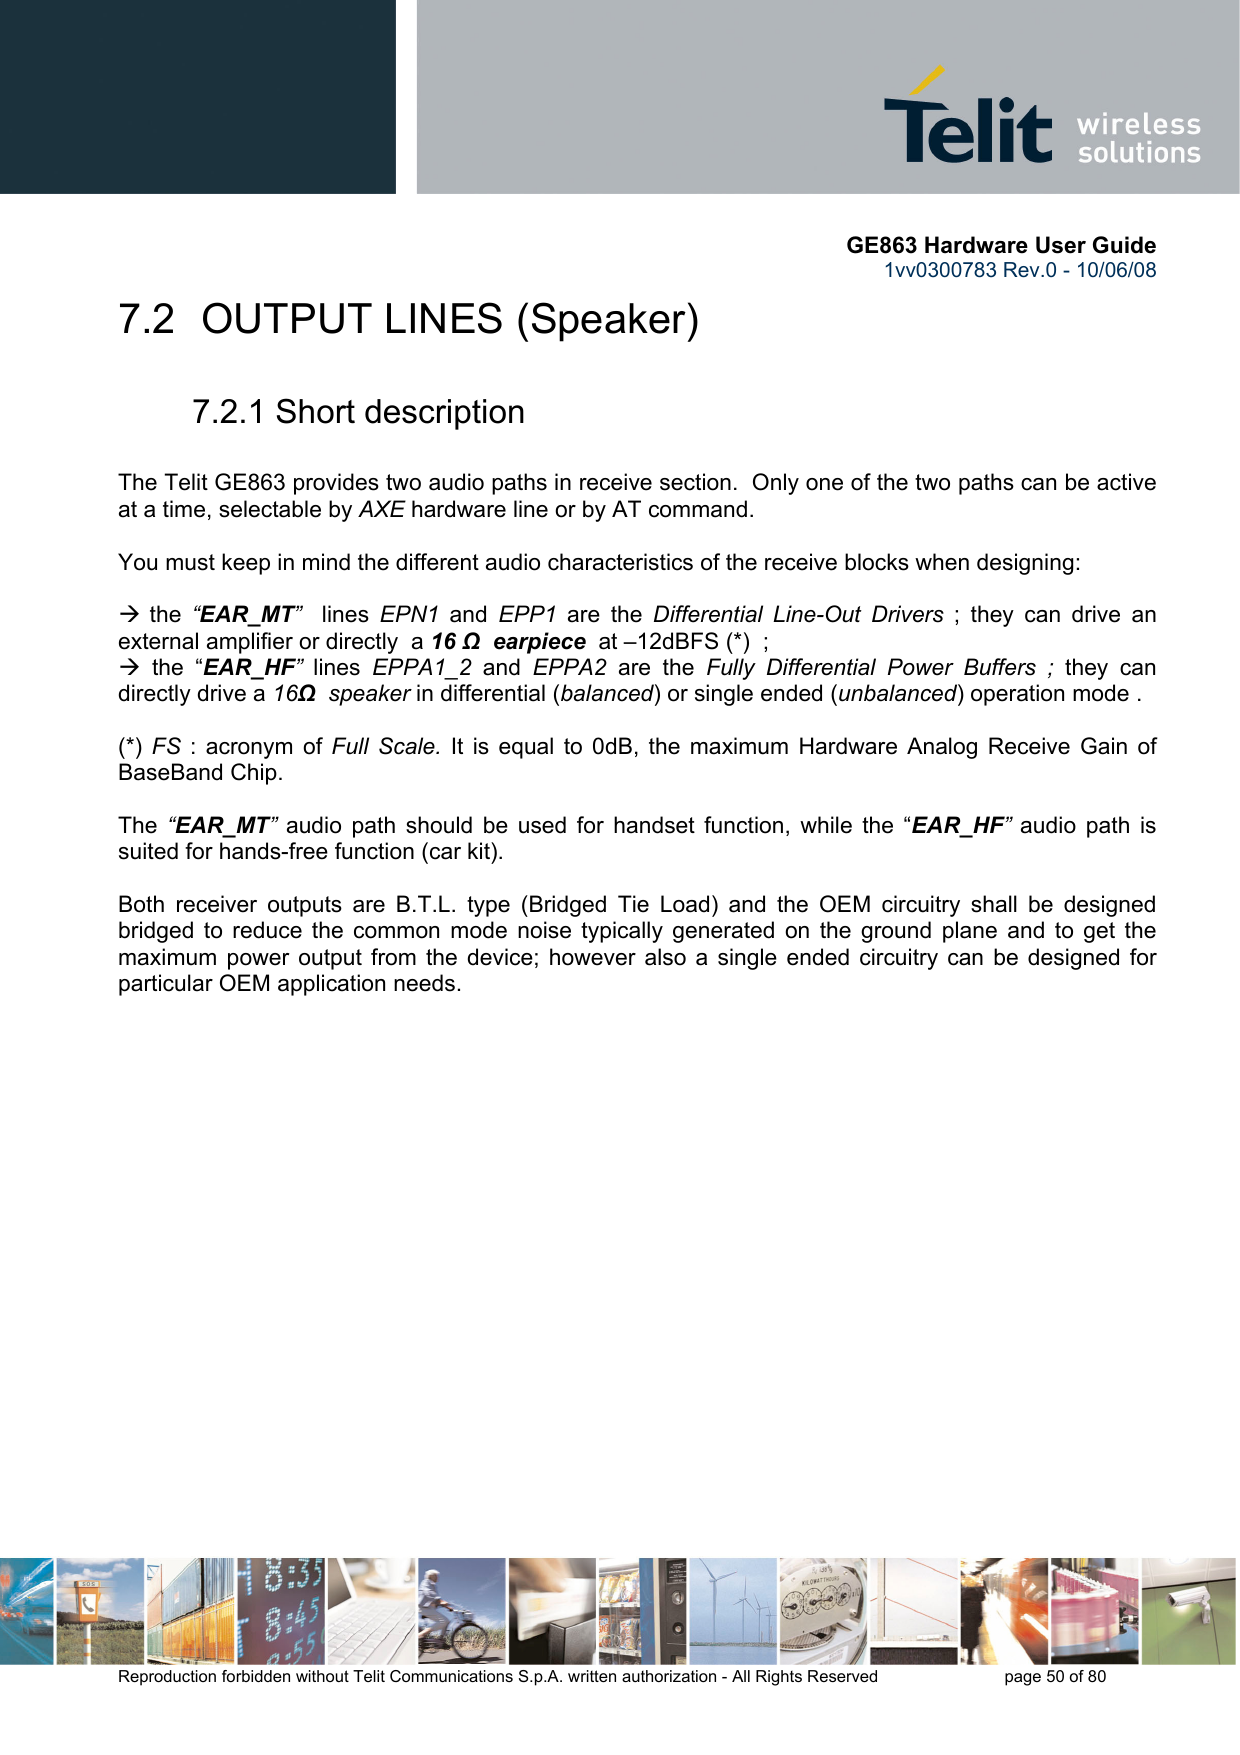       GE863 Hardware User Guide 1vv0300783 Rev.0 - 10/06/08 Reproduction forbidden without Telit Communications S.p.A. written authorization - All Rights Reserved    page 50 of 80  7.2  OUTPUT LINES (Speaker)  7.2.1 Short description  The Telit GE863 provides two audio paths in receive section.  Only one of the two paths can be active at a time, selectable by AXE hardware line or by AT command.   You must keep in mind the different audio characteristics of the receive blocks when designing:  Æ the  “EAR_MT”  lines  EPN1  and  EPP1 are the Differential Line-Out Drivers ; they can drive an external amplifier or directly  a 16 Ω  earpiece  at –12dBFS (*)  ;  Æ the “EAR_HF”  lines  EPPA1_2 and EPPA2 are the Fully Differential Power Buffers ; they can directly drive a 16Ω  speaker in differential (balanced) or single ended (unbalanced) operation mode .  (*)  FS : acronym of Full Scale. It is equal to 0dB, the maximum Hardware Analog Receive Gain of BaseBand Chip.  The  “EAR_MT”  audio path should be used for handset function, while the “EAR_HF”  audio path is suited for hands-free function (car kit).  Both receiver outputs are B.T.L. type (Bridged Tie Load) and the OEM circuitry shall be designed bridged to reduce the common mode noise typically generated on the ground plane and to get the maximum power output from the device; however also a single ended circuitry can be designed for particular OEM application needs.  